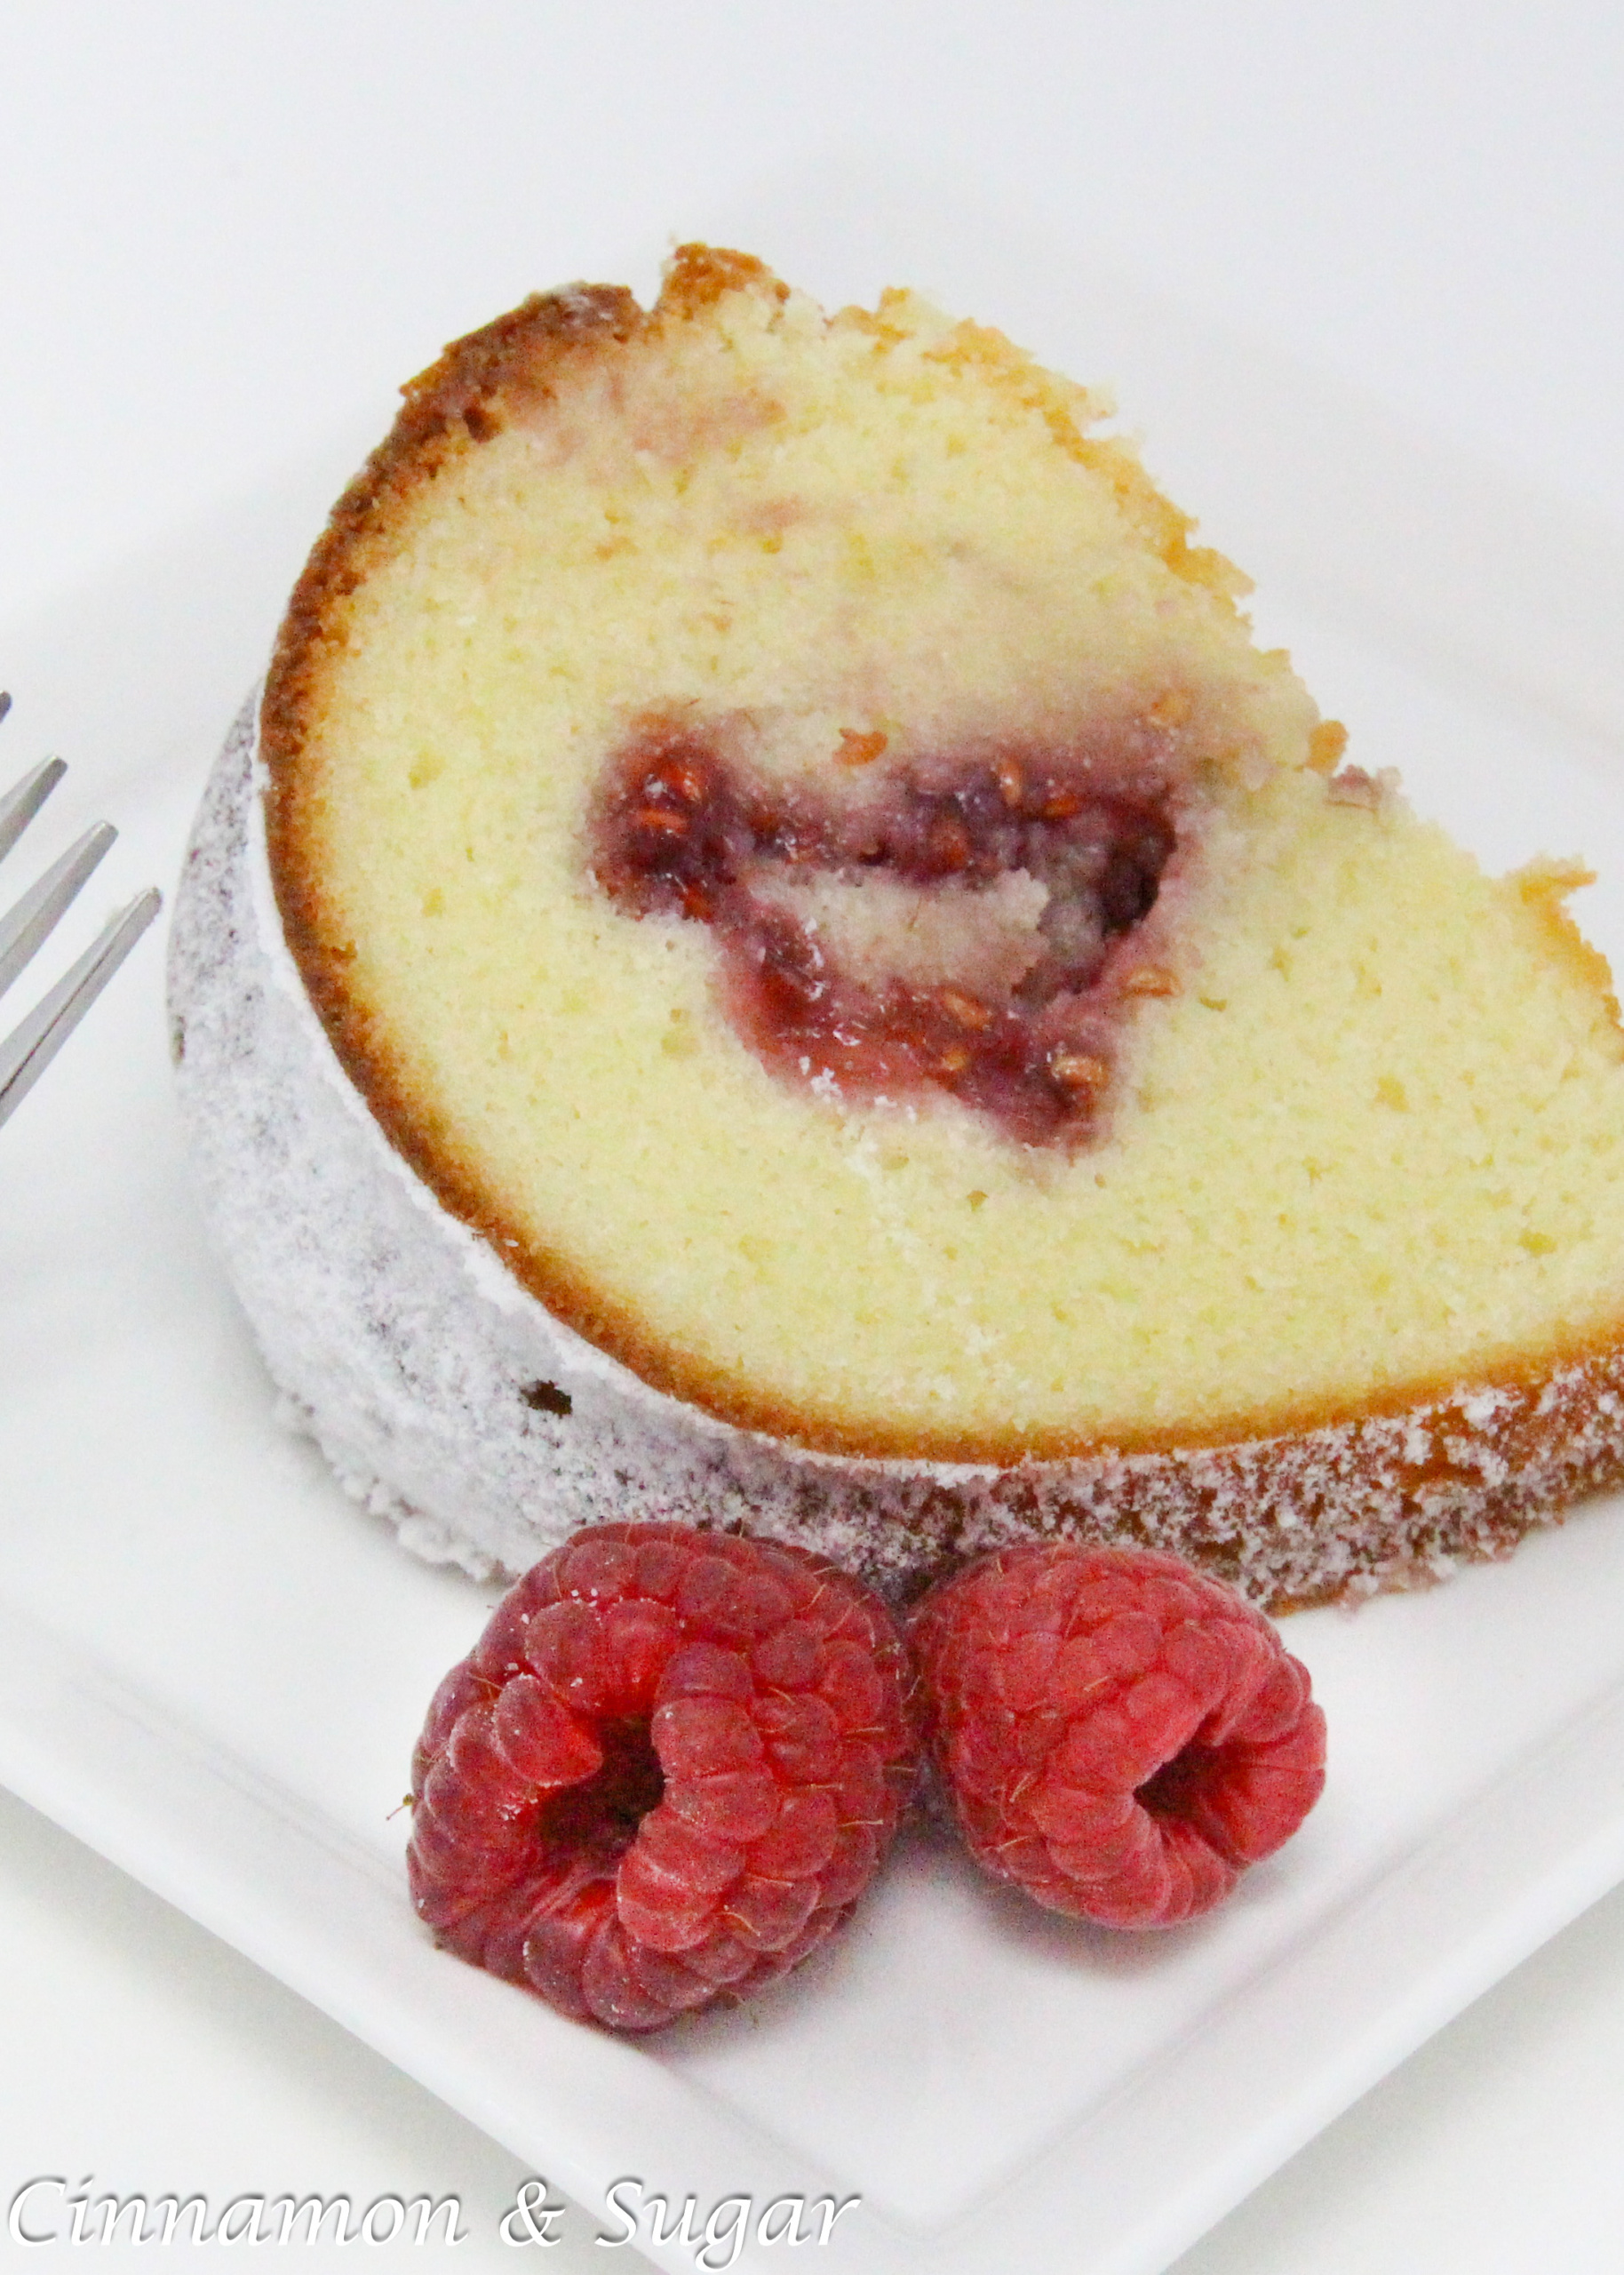 Portuguese Yogurt Cake is moist with a delicate flavor lending itself to versatility by swirling in your favorite jam or chocolate chips. With a quick sprinkle of powdered sugar and a handful of fresh raspberries for garnish, this makes a delicious dessert to serve on any occasion. Recipe shared with permission granted by Mary Jane Maffini, author of DEATH PLANS A PERFECT TRIP. 